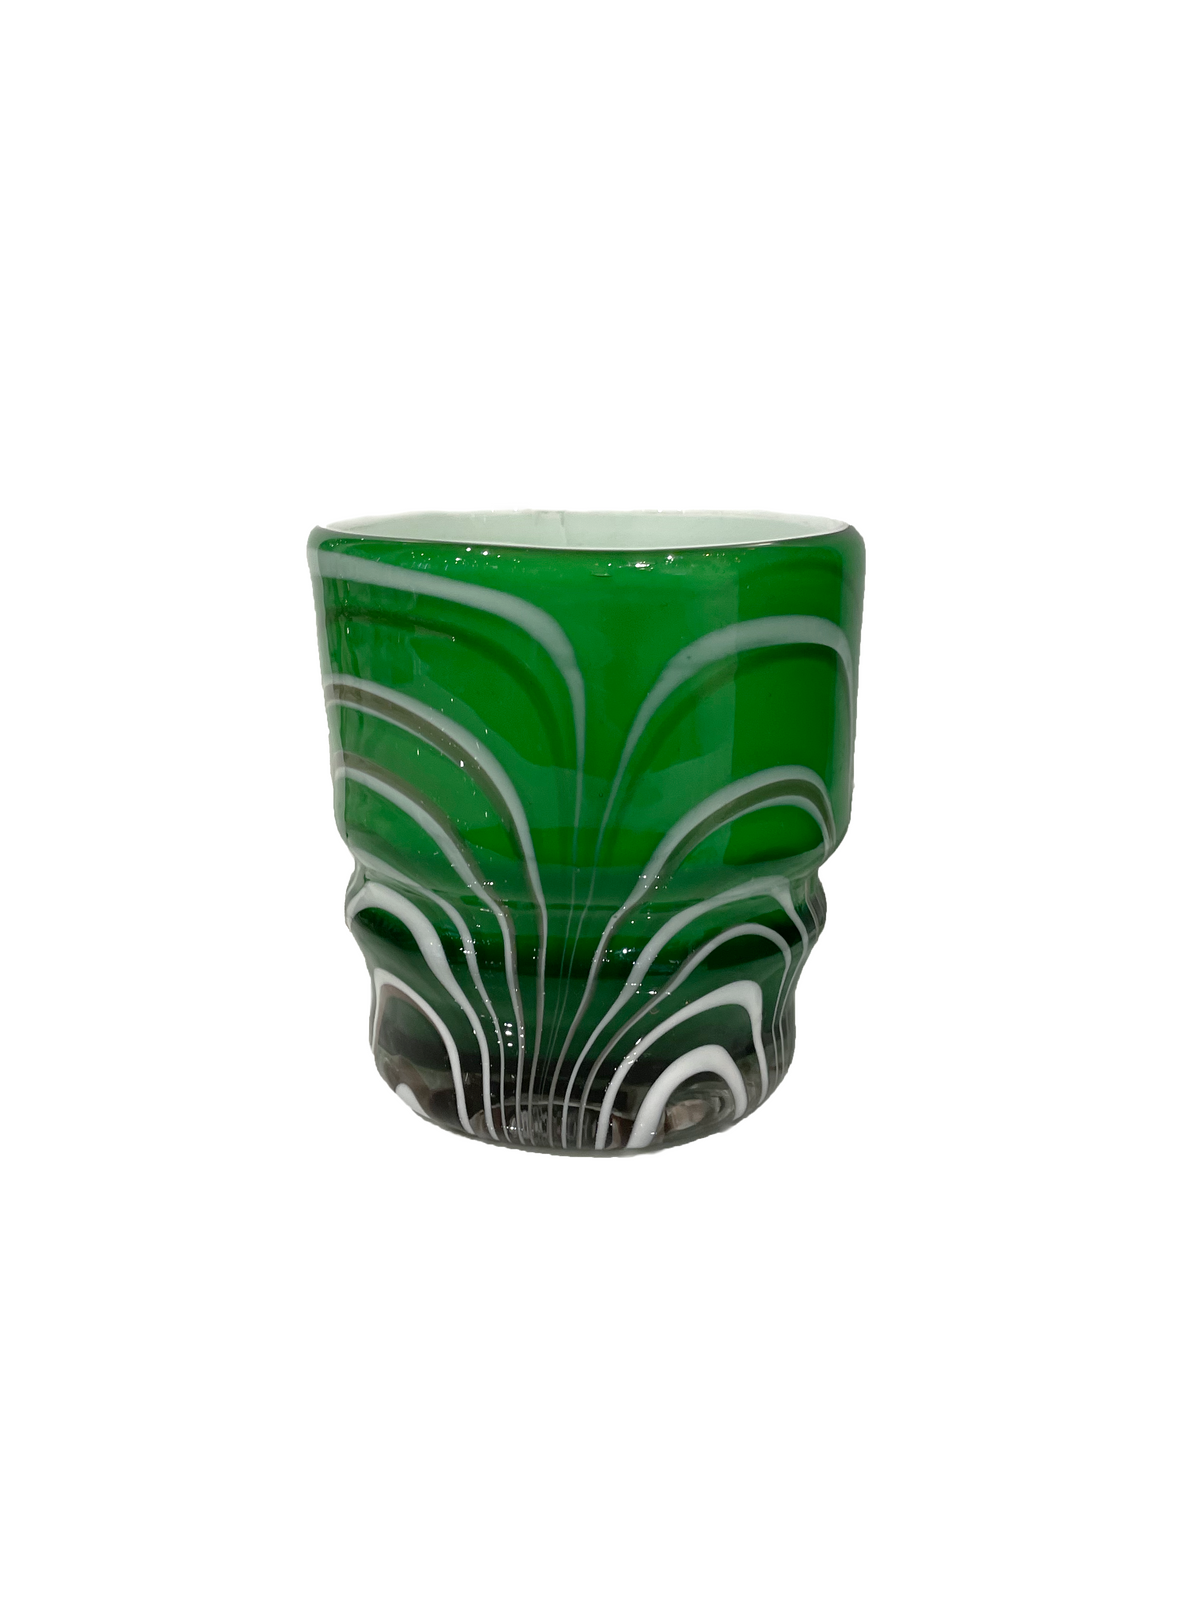 Small Marbled Green and White Vase